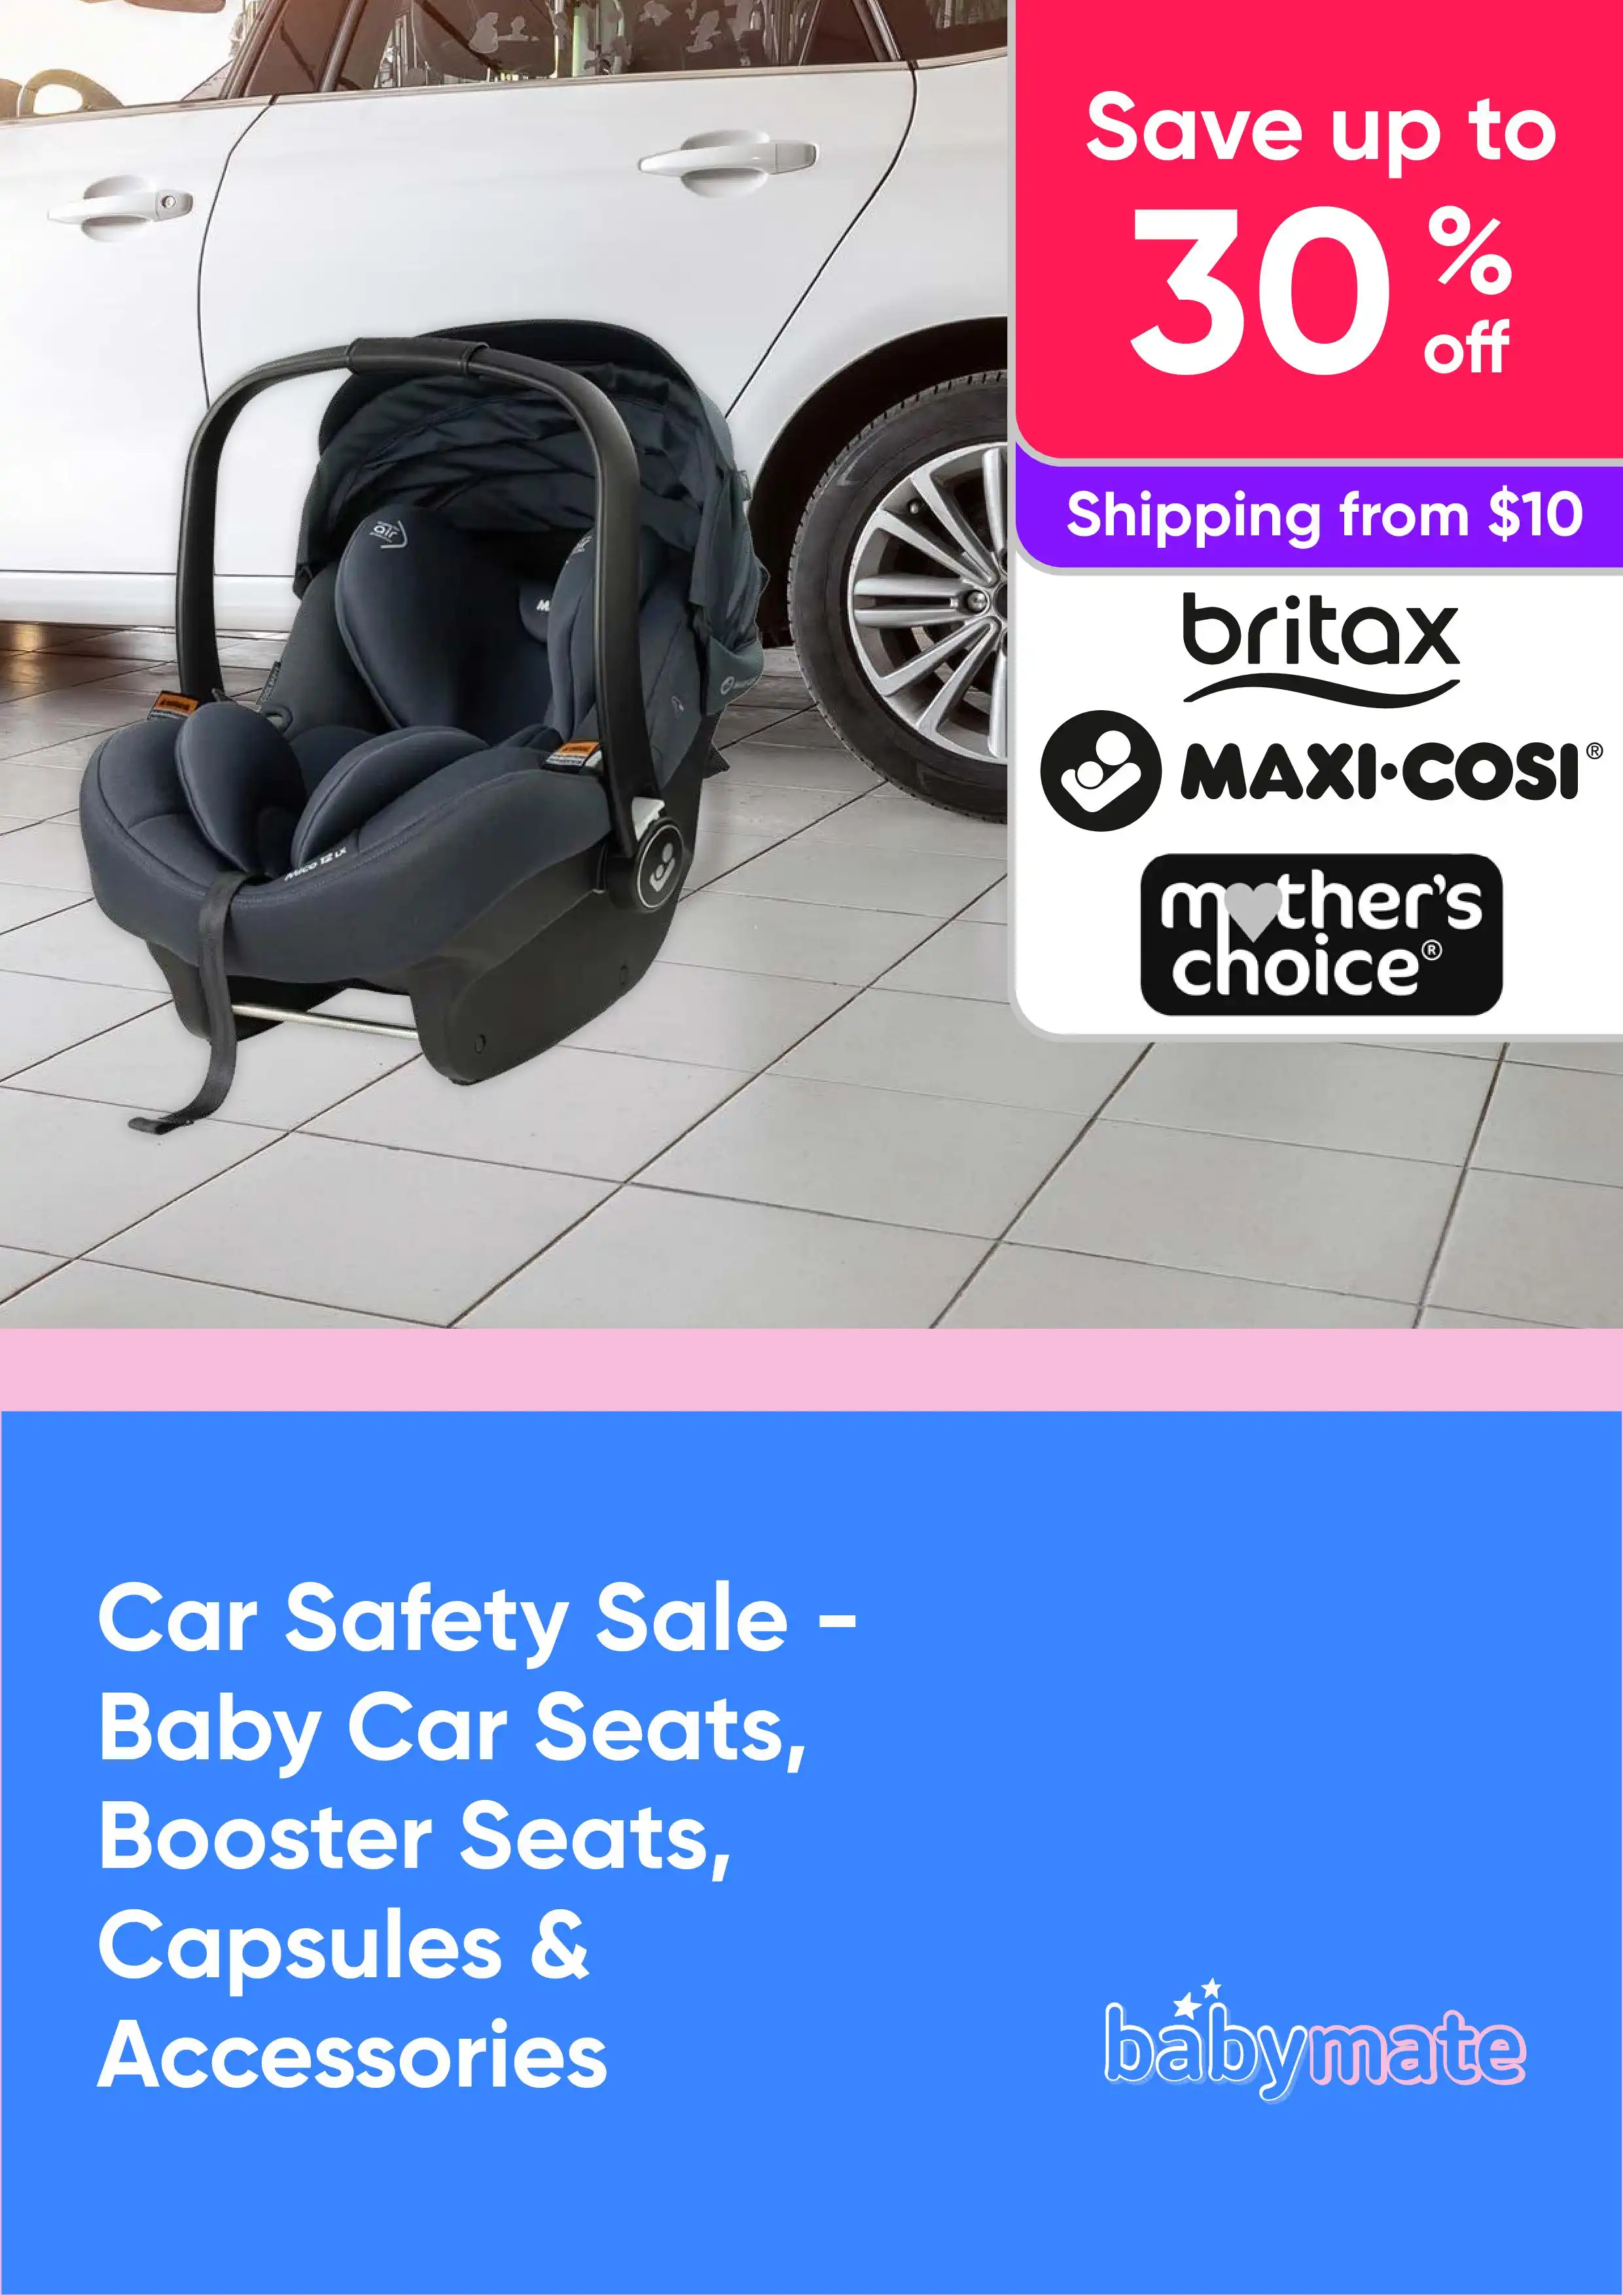 Car Safety Sale - Baby Car Seats, Booster Seats, Capsules and More